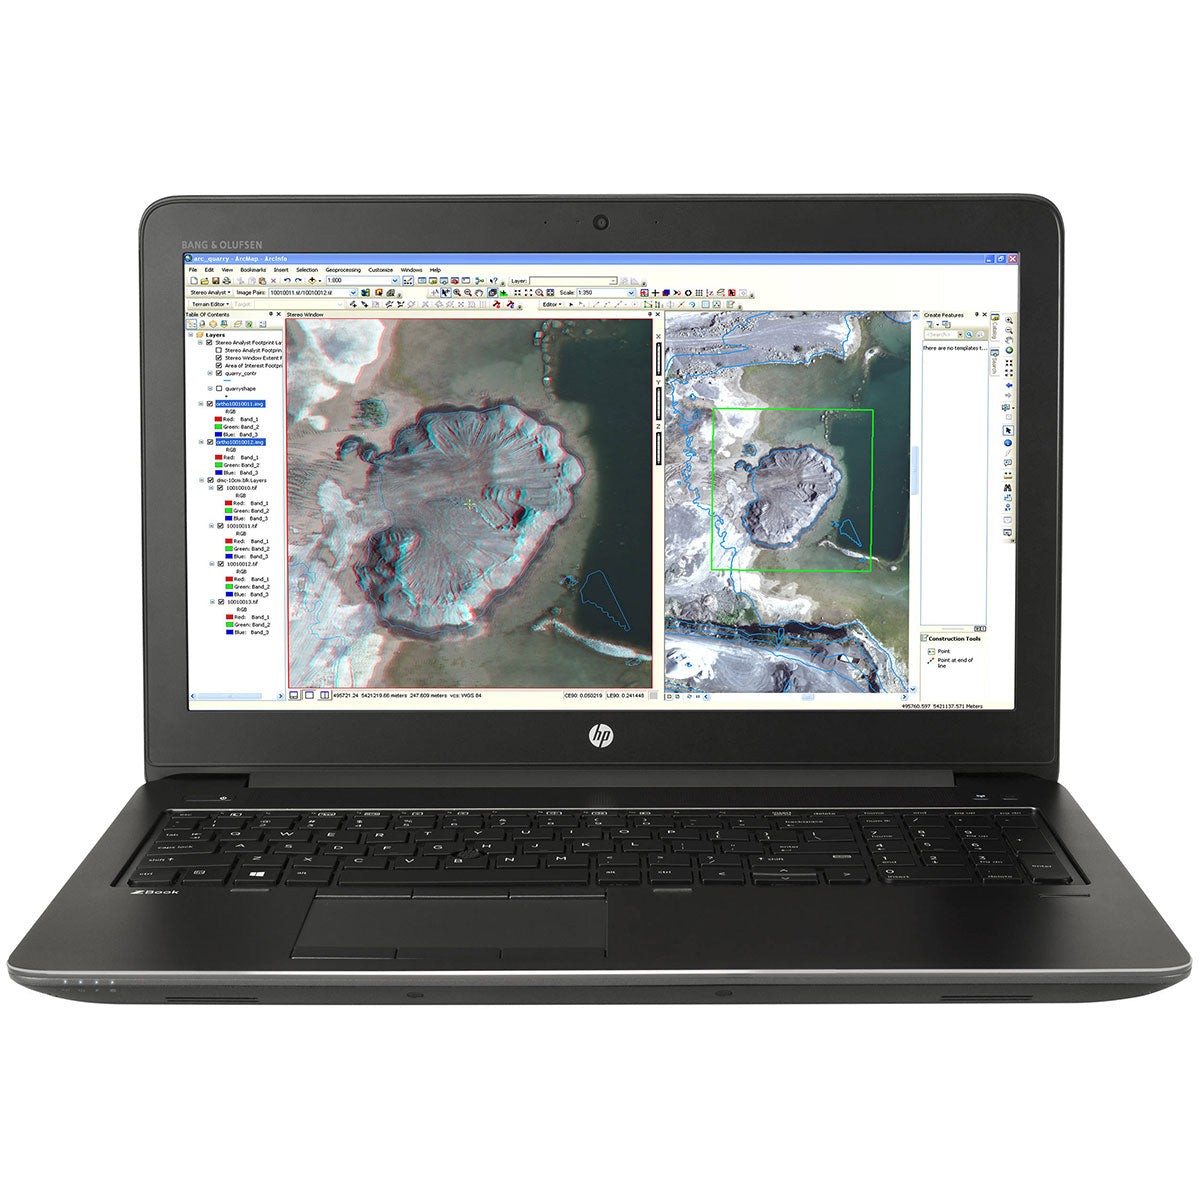 HP ZBook 15 G3 Mobile Workstation Intel Core i7-6820HQ 16GB RAM 512GB SSD 4GB Nvidia Graphics Touchscreen